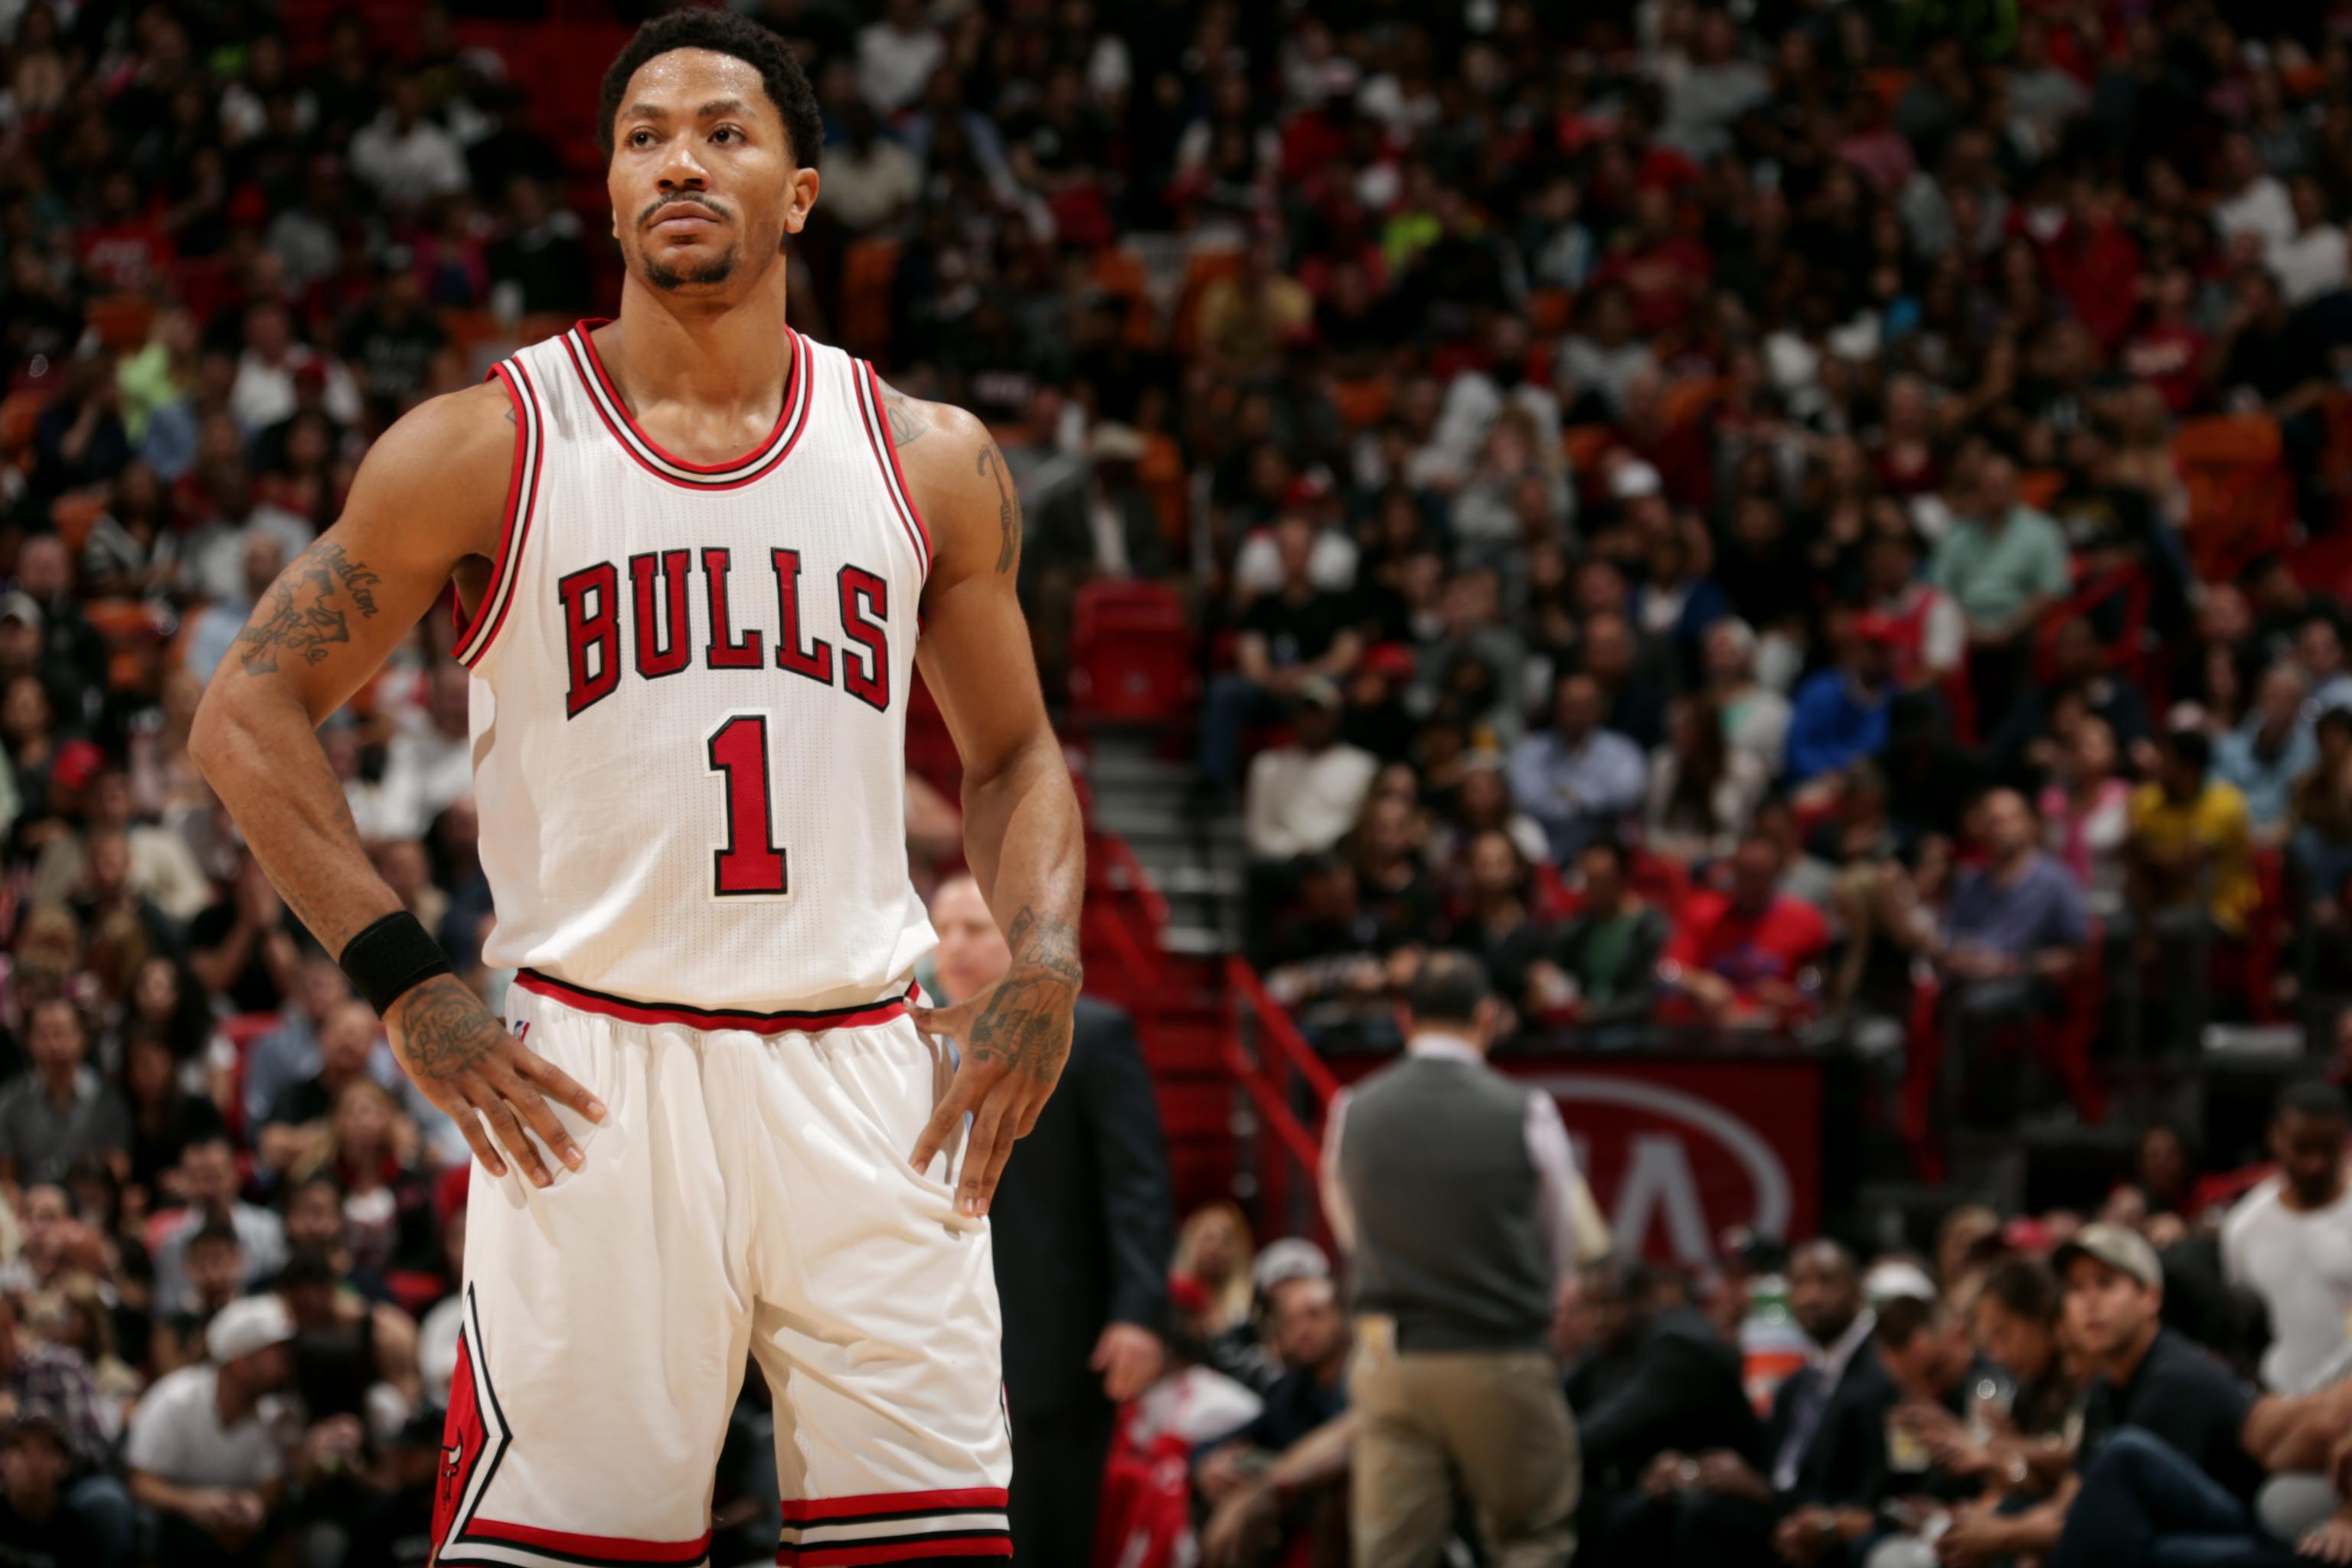 Derrick Rose Gives Nostalgic Nod to College Days With New